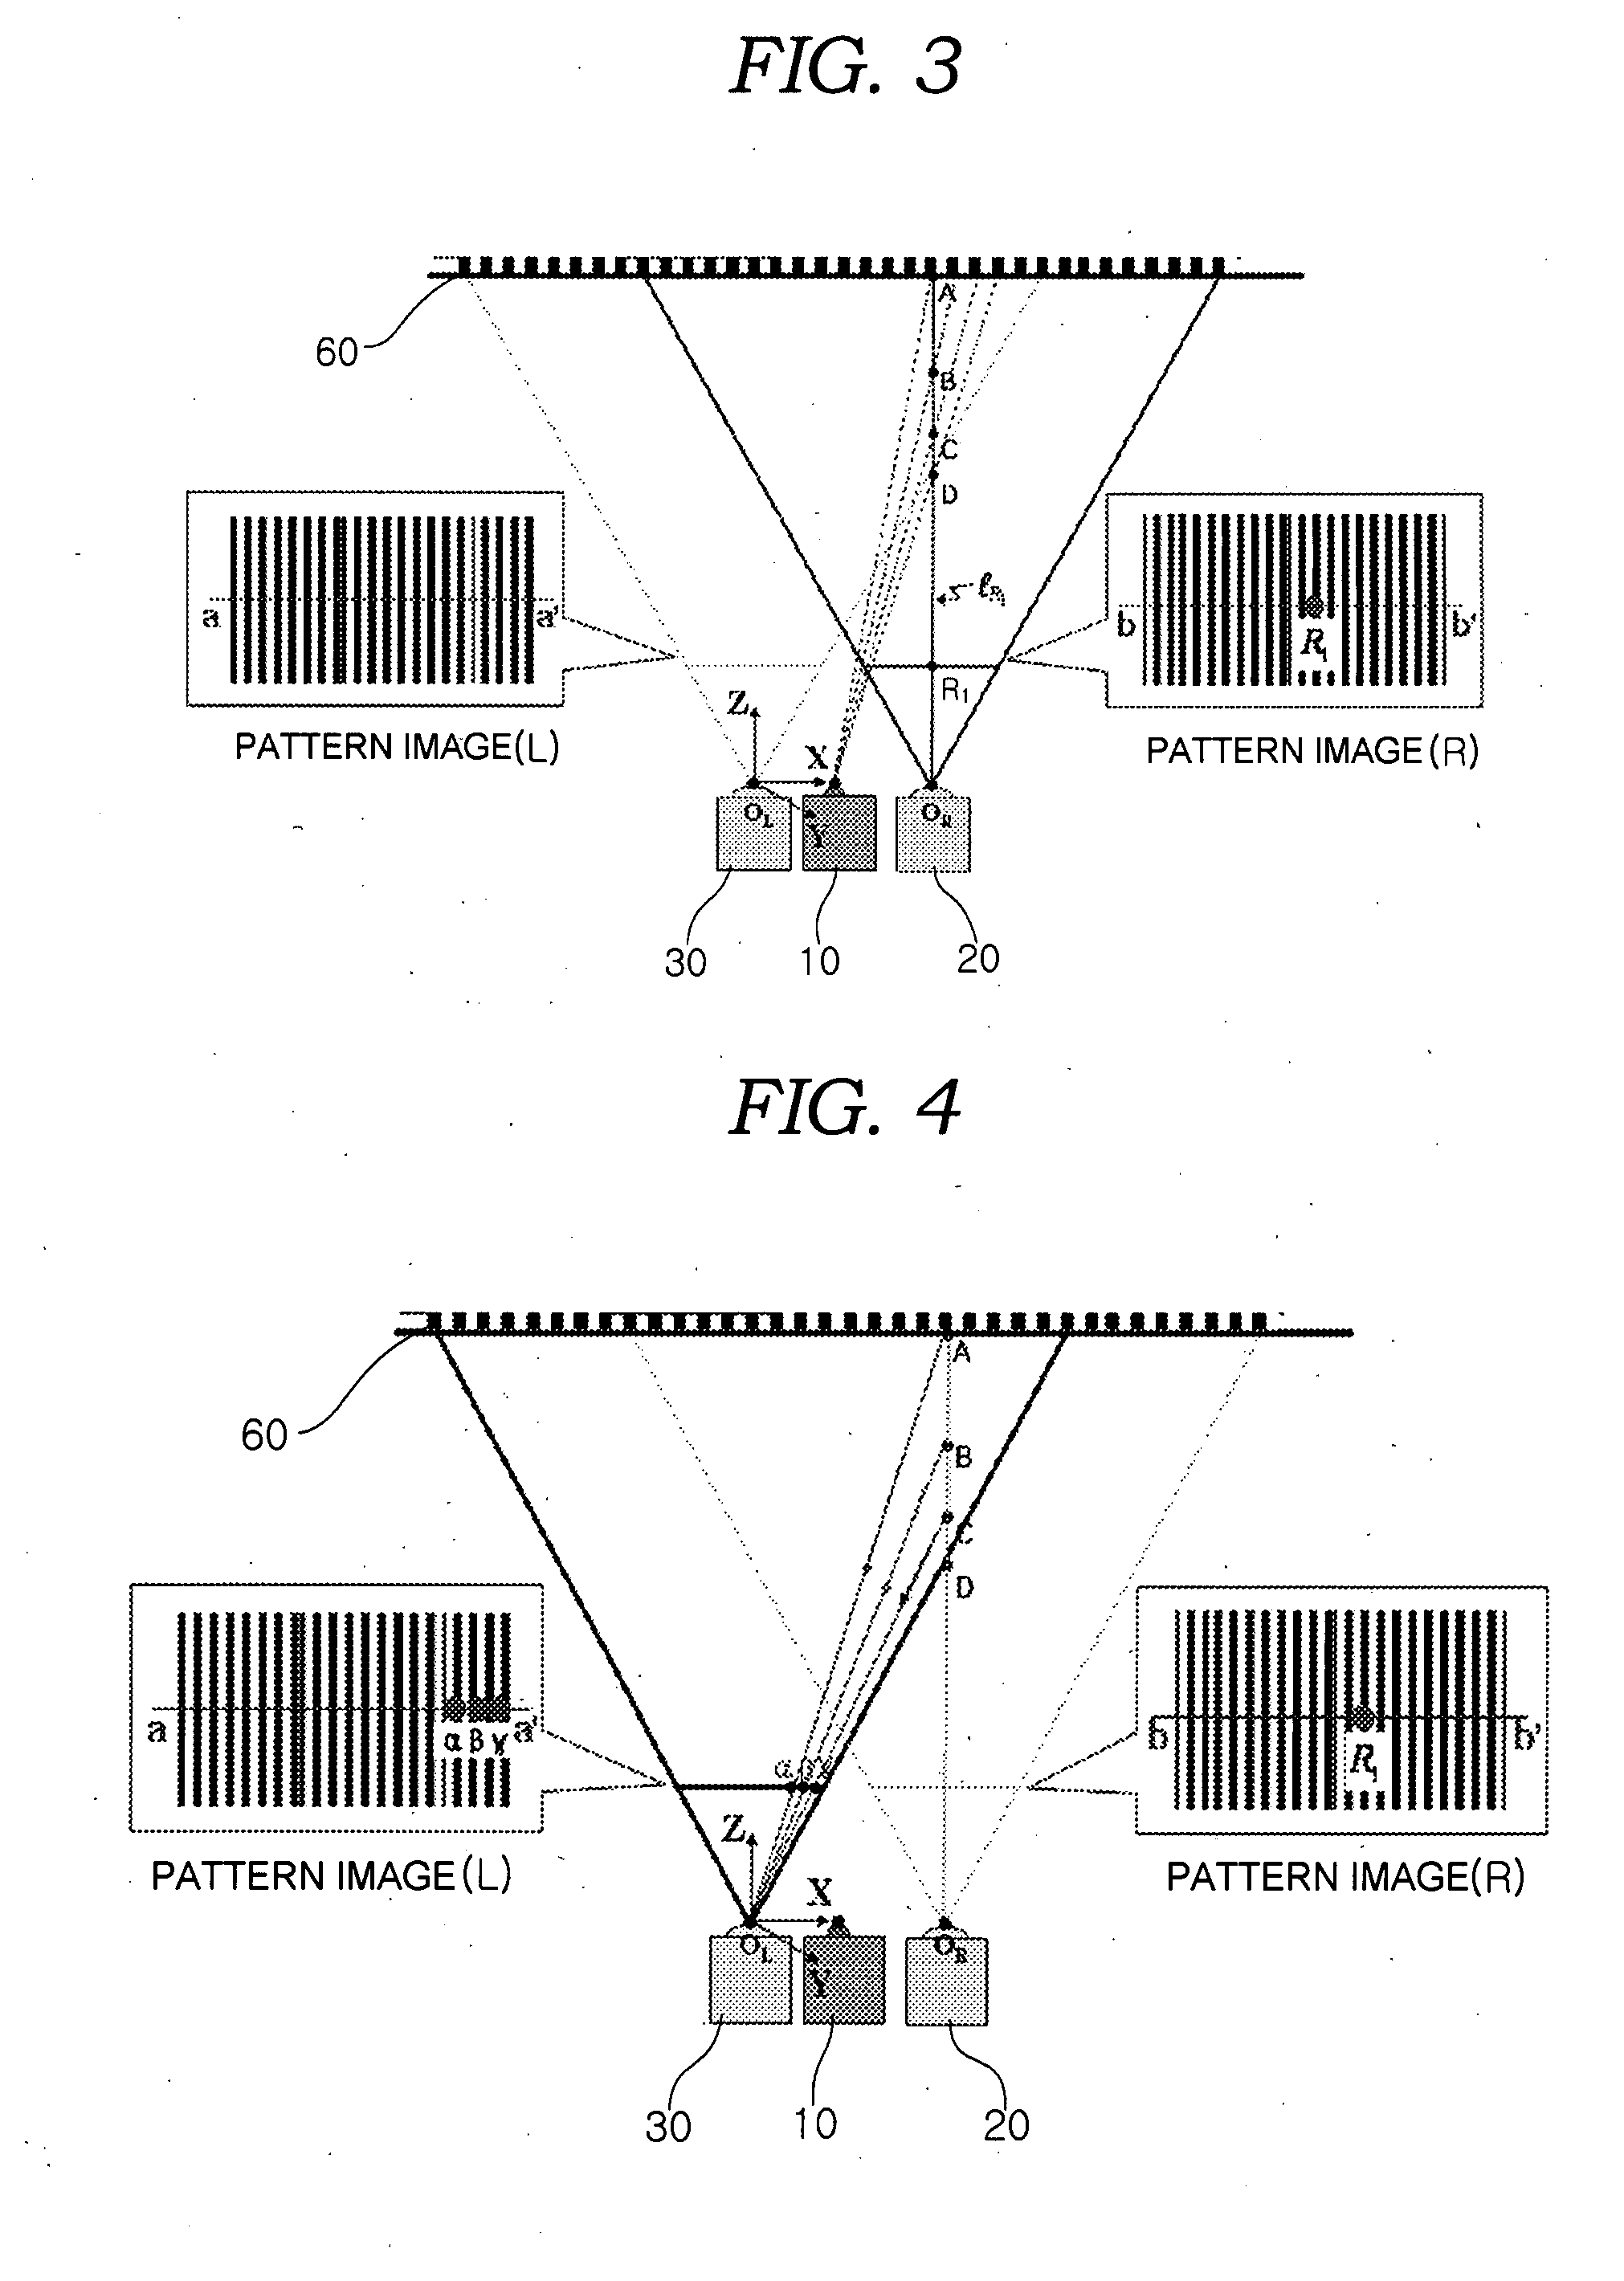 Three-dimensional shape measurement apparatus and method for eliminating2pi ambiguity of moire principle and omitting phase shifting means